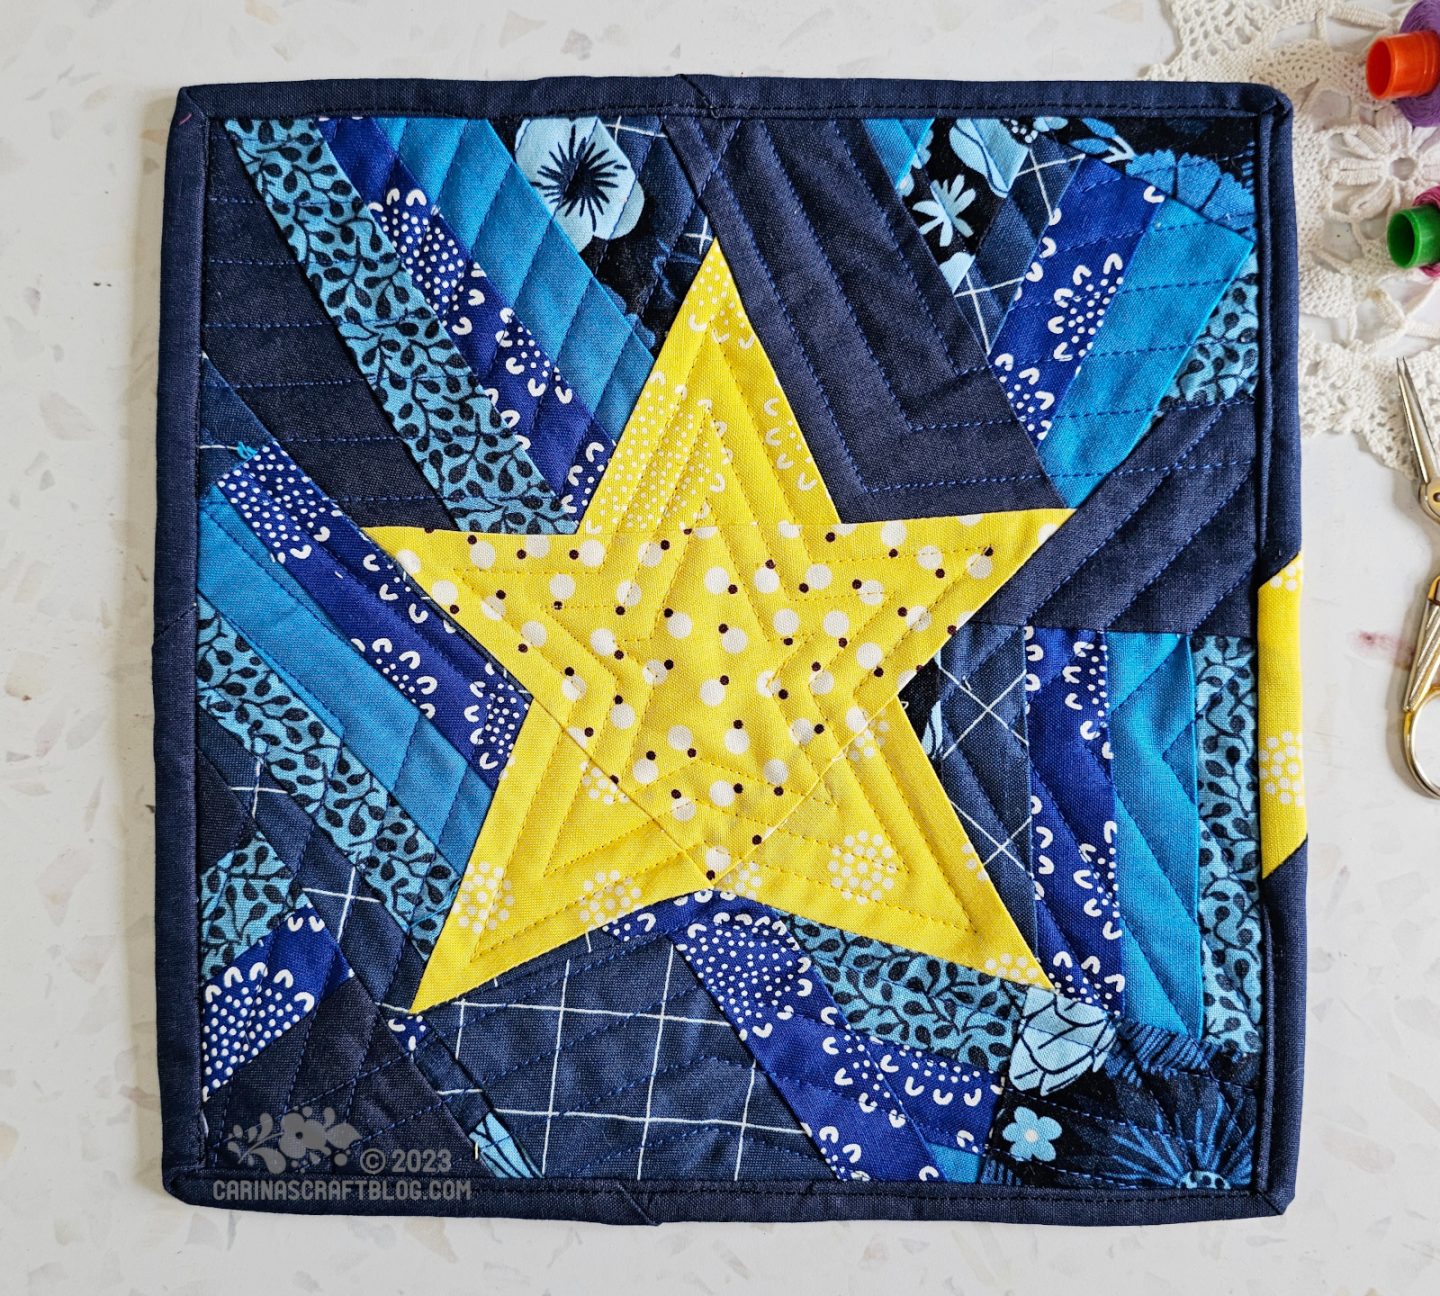 View from above of a mini quilt. Randomly pieced five pointed star on a dark blue background.